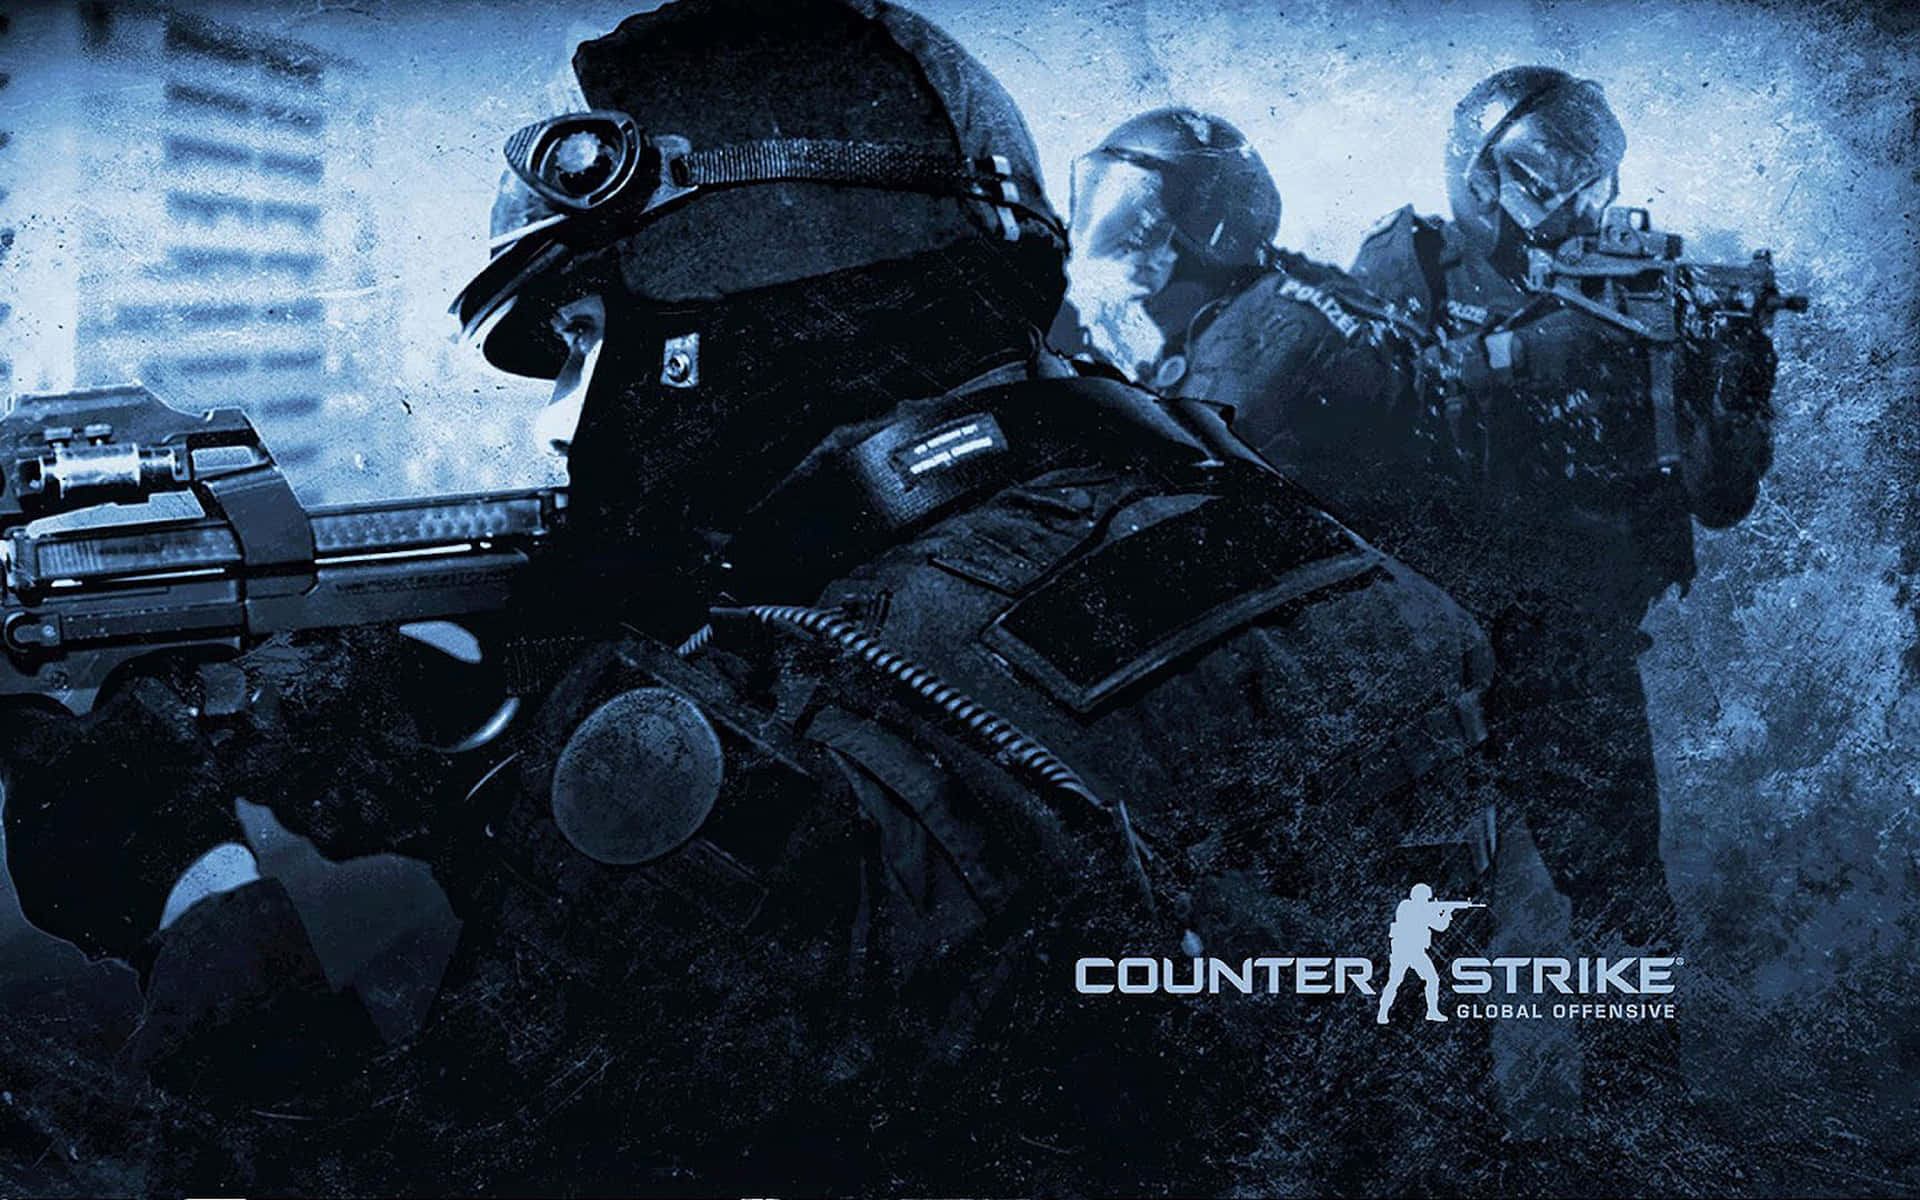 Show Your Skill in the Best Counter-Strike Global Offensive